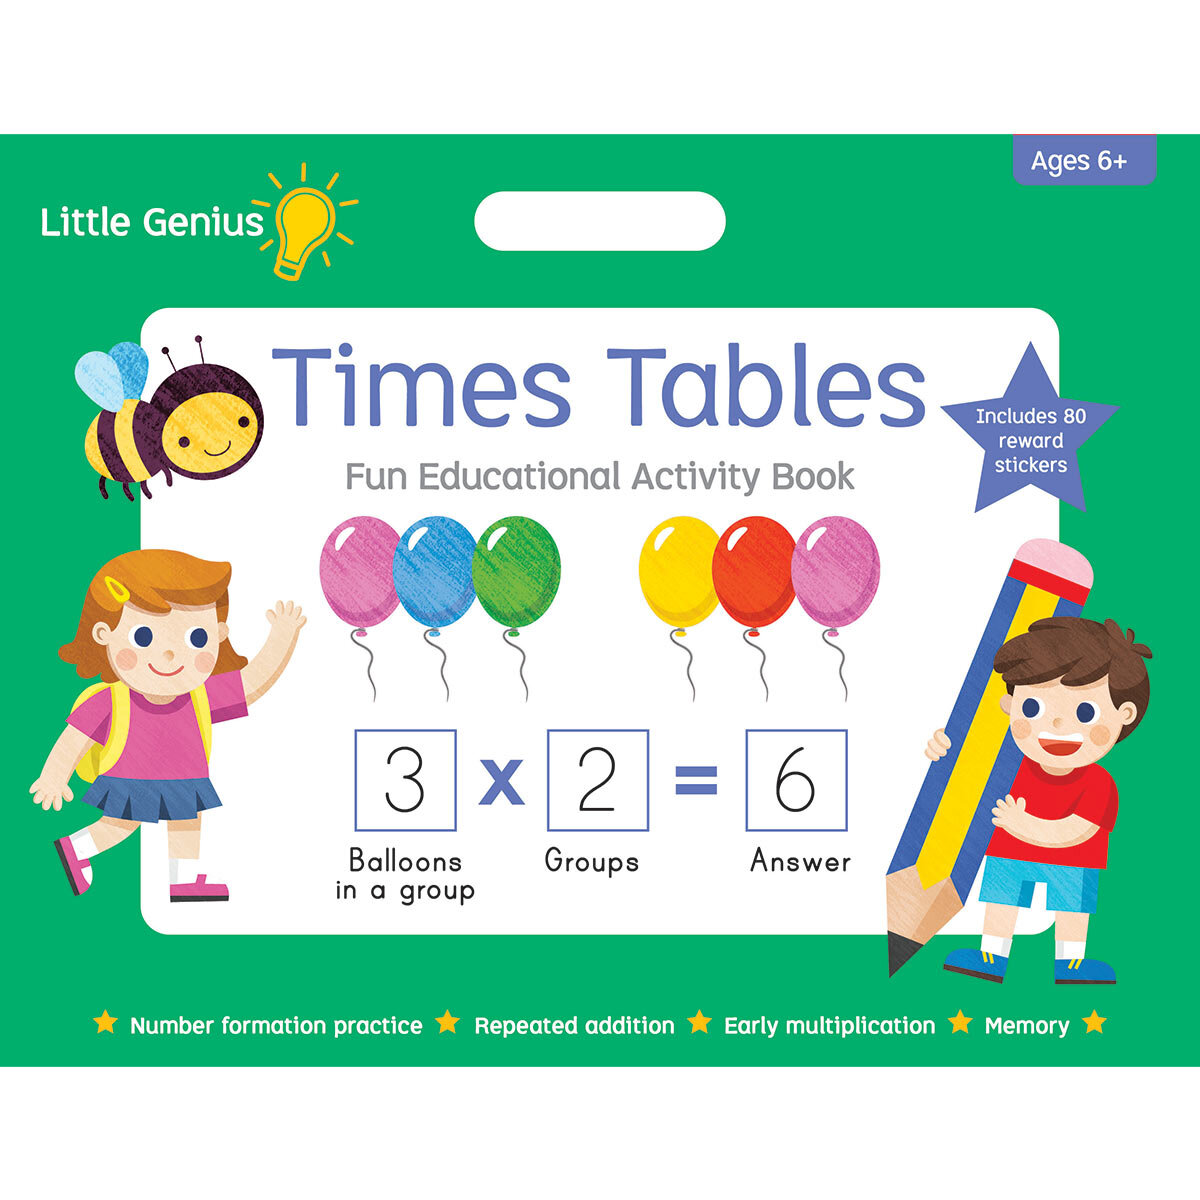 Image of front of book-times table